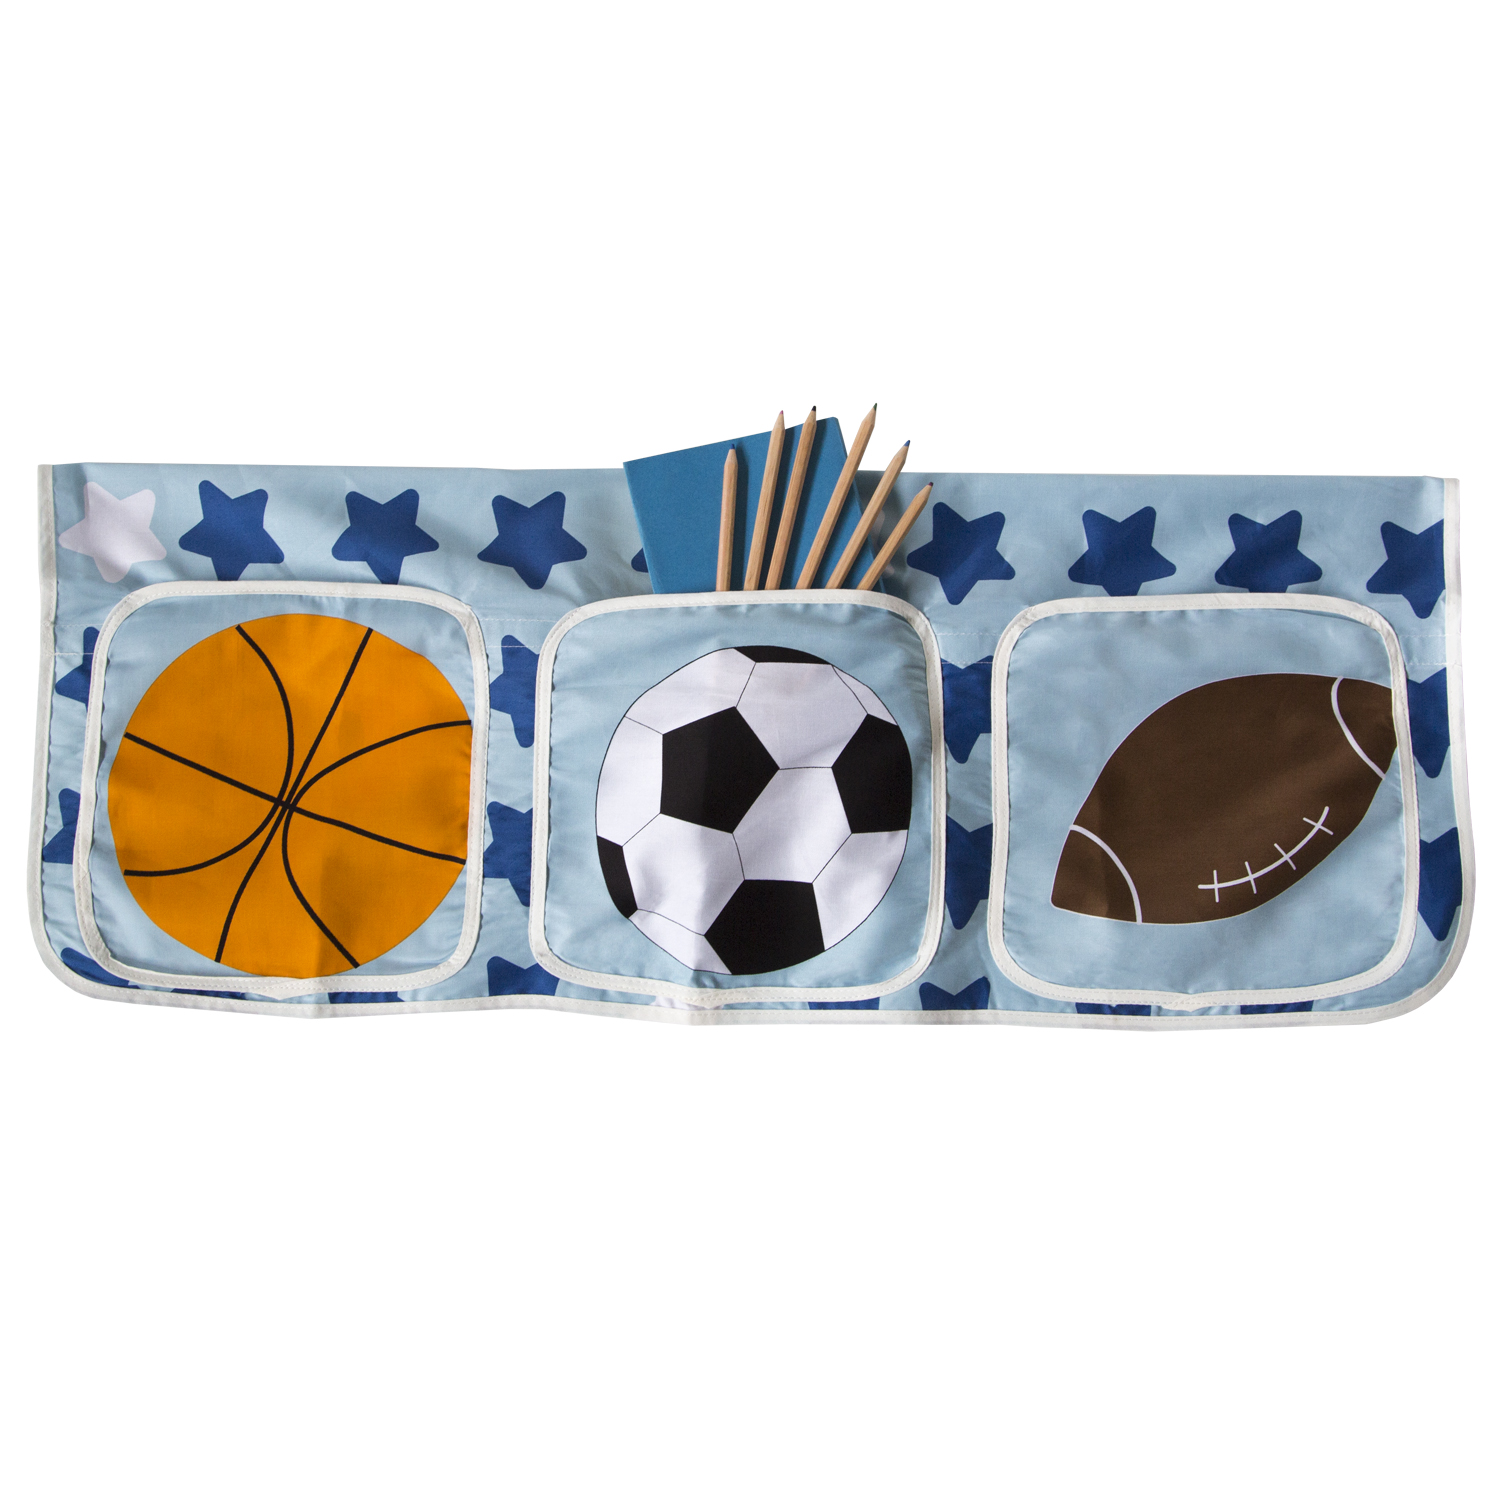 Bedding Bunk Bed Cloth Bag Cot Bed Accessories Children´s Bed Blue Football